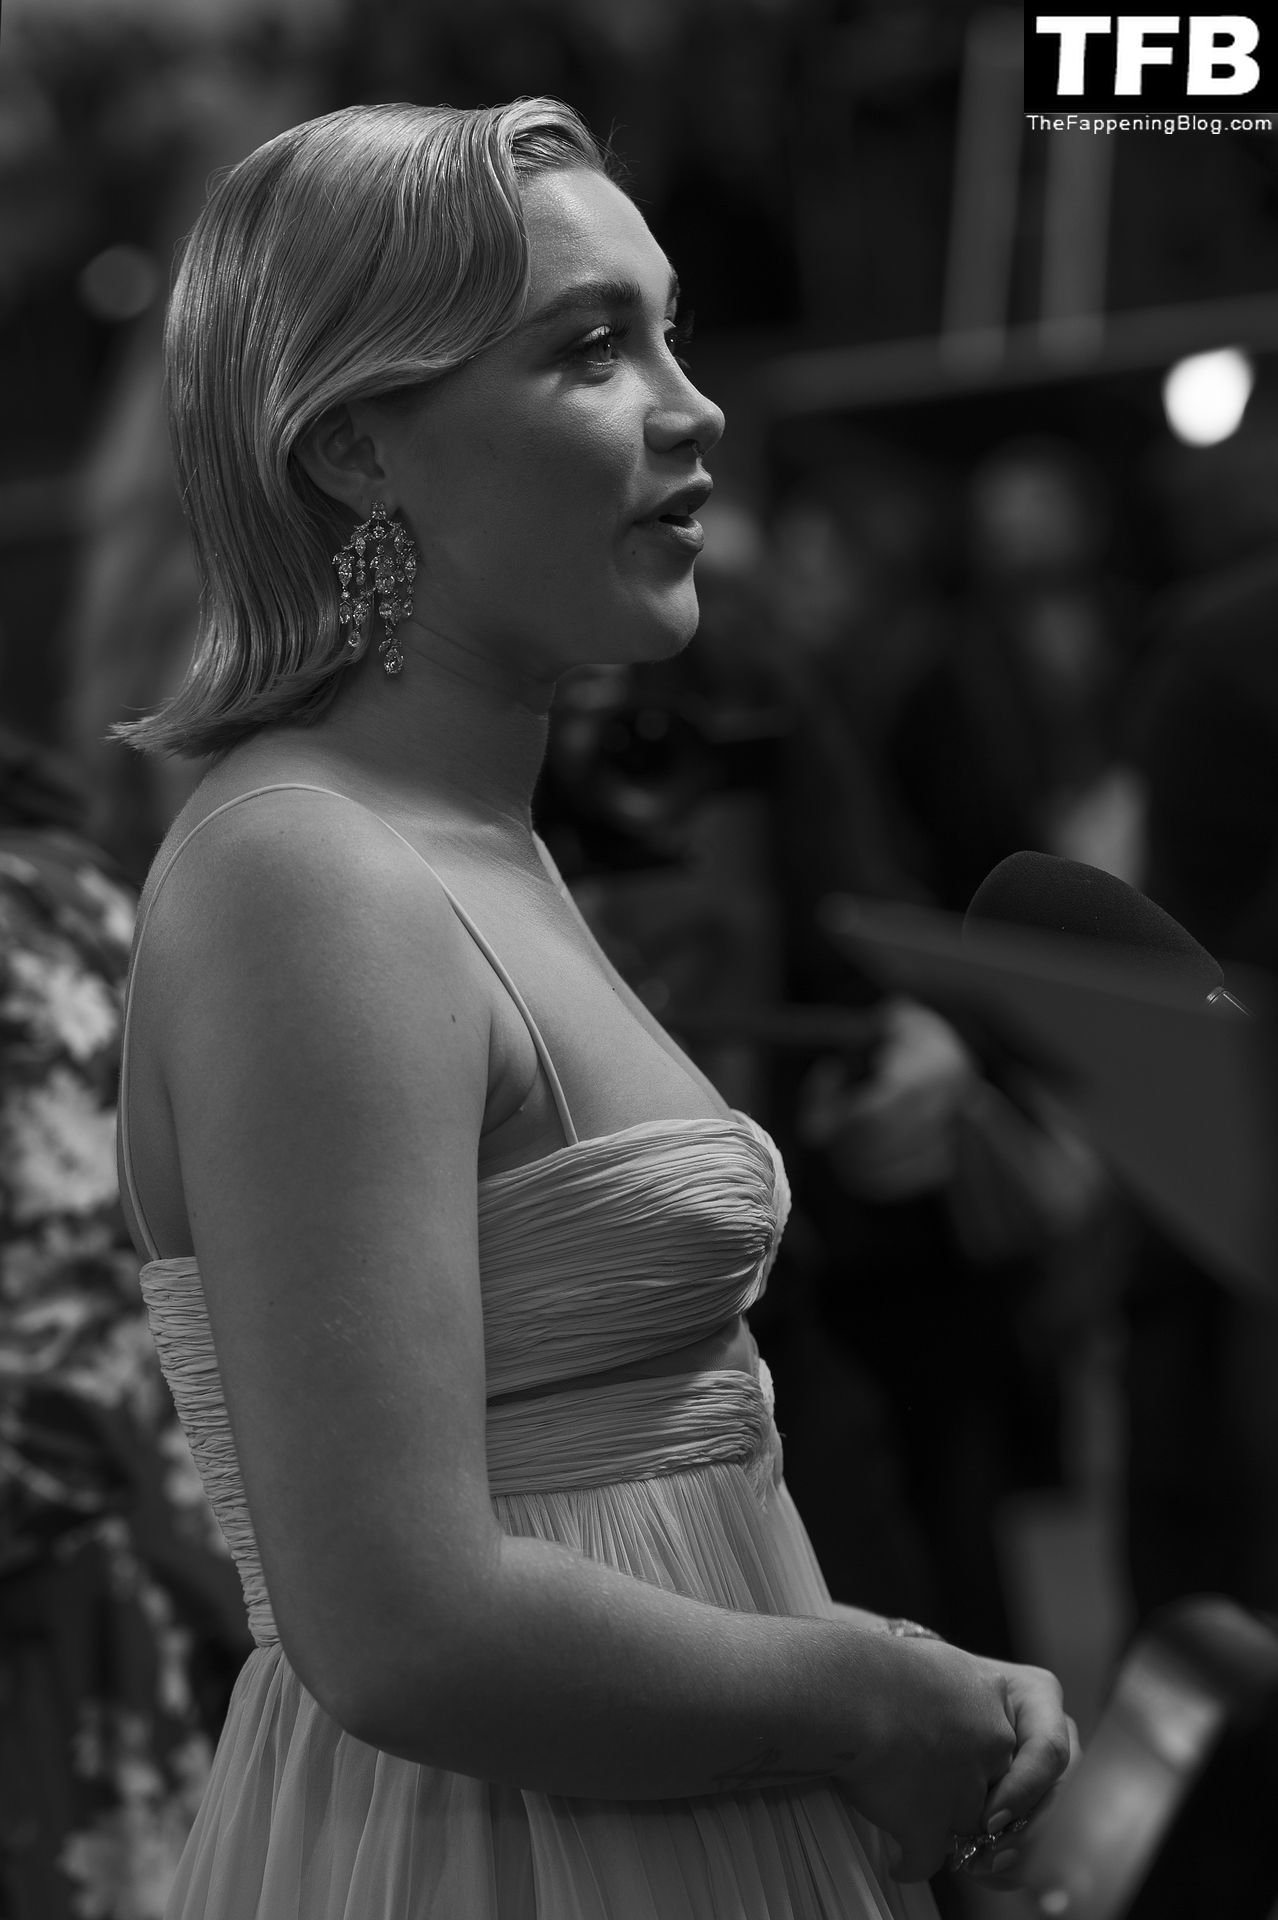 Florence-Pugh-Sexy-The-Fappening-Blog-130.jpg